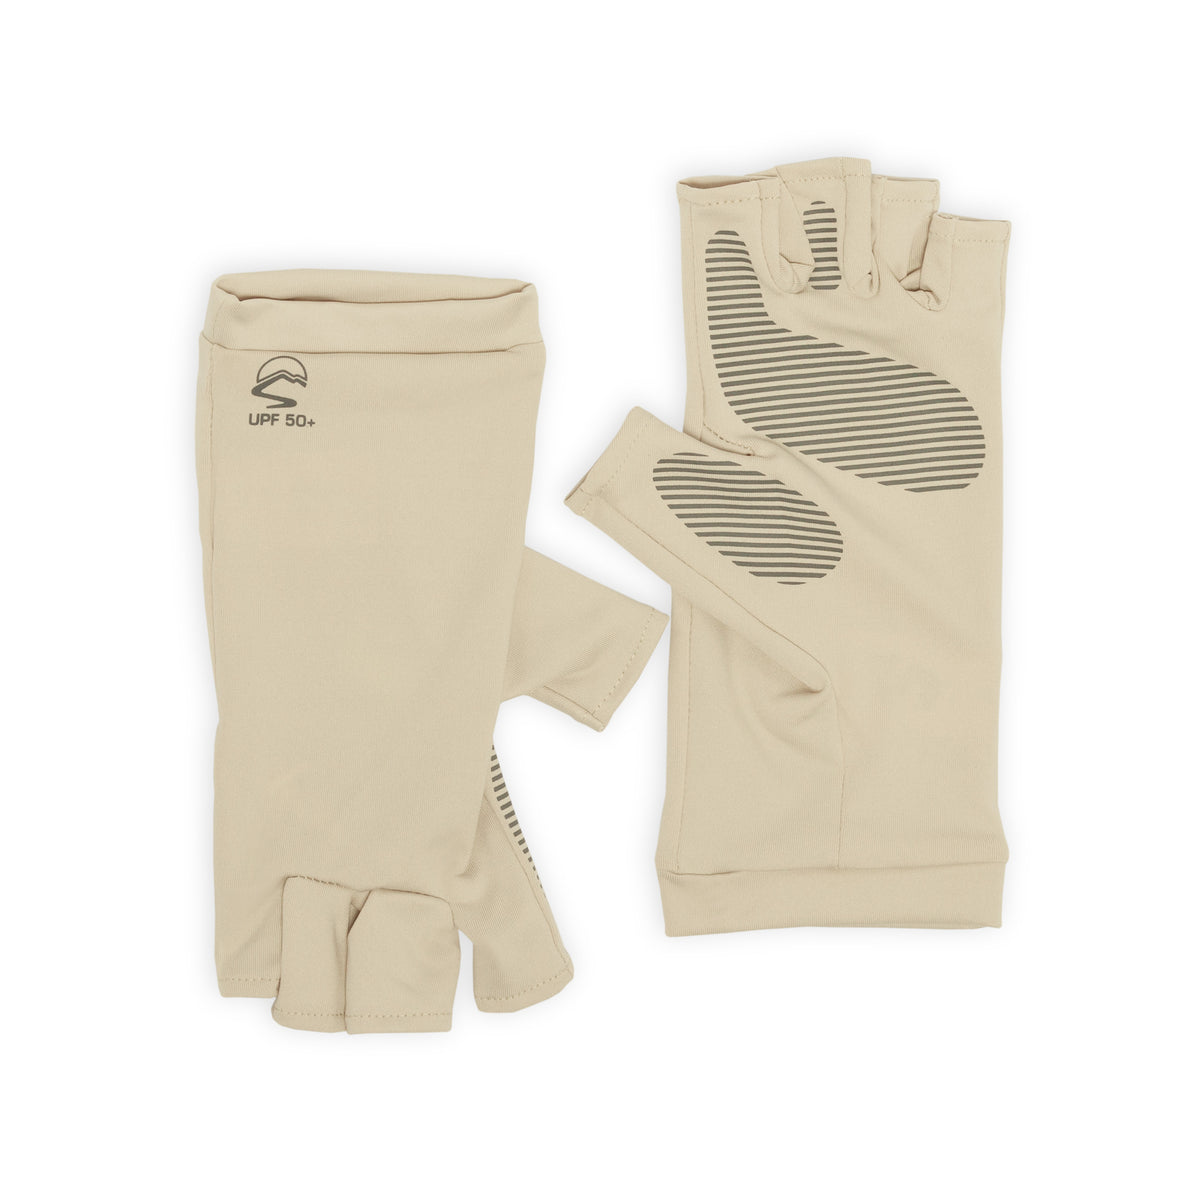 Sunday Afternoons UVShield Cool Gloves, Fingerless - L/XL - White